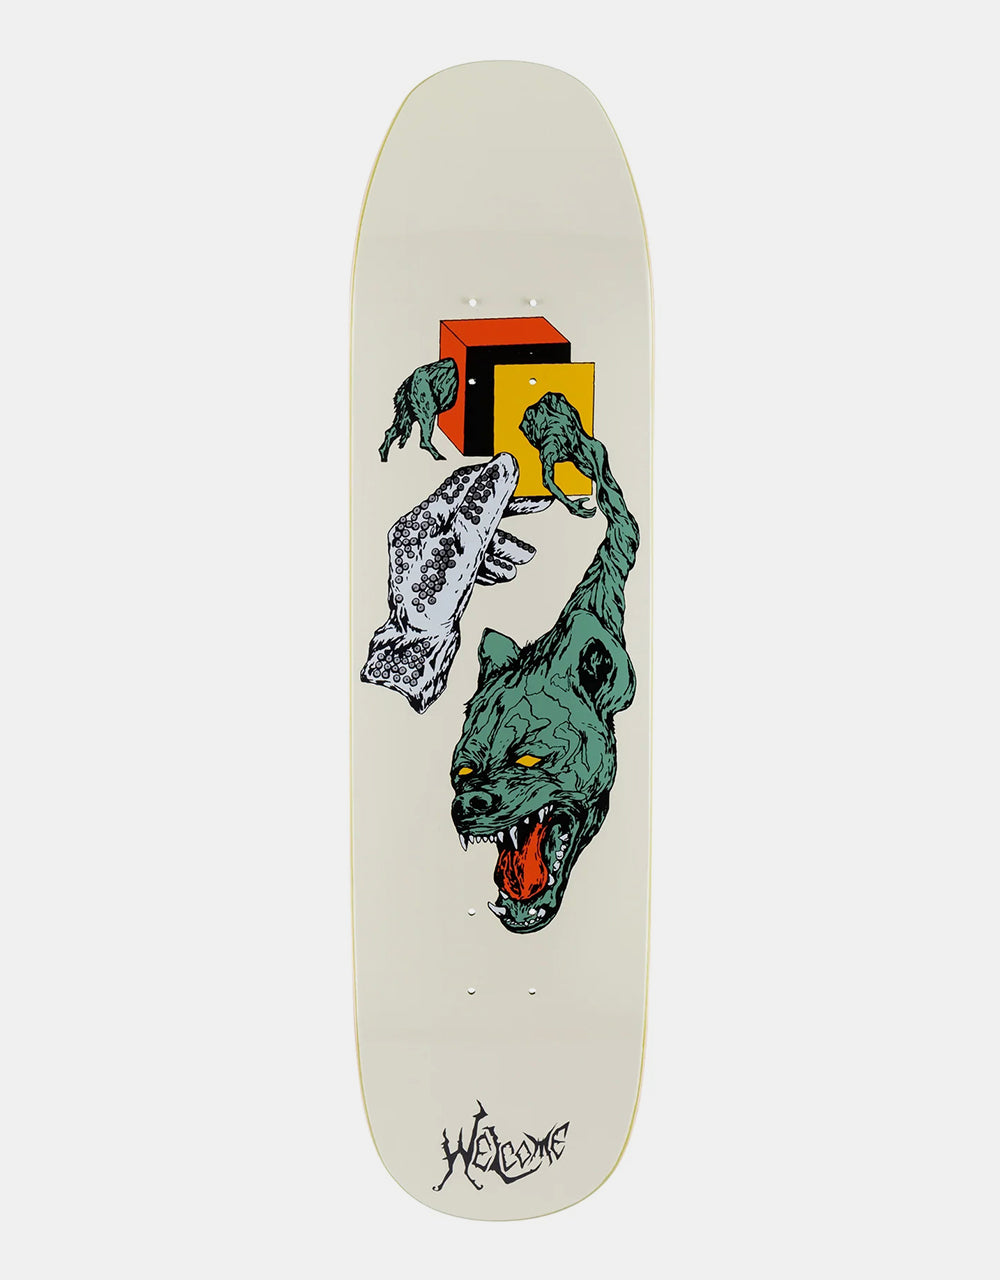 Welcome Face of a Lover on Son of Moontrimmer Skateboard Deck - 8.25"